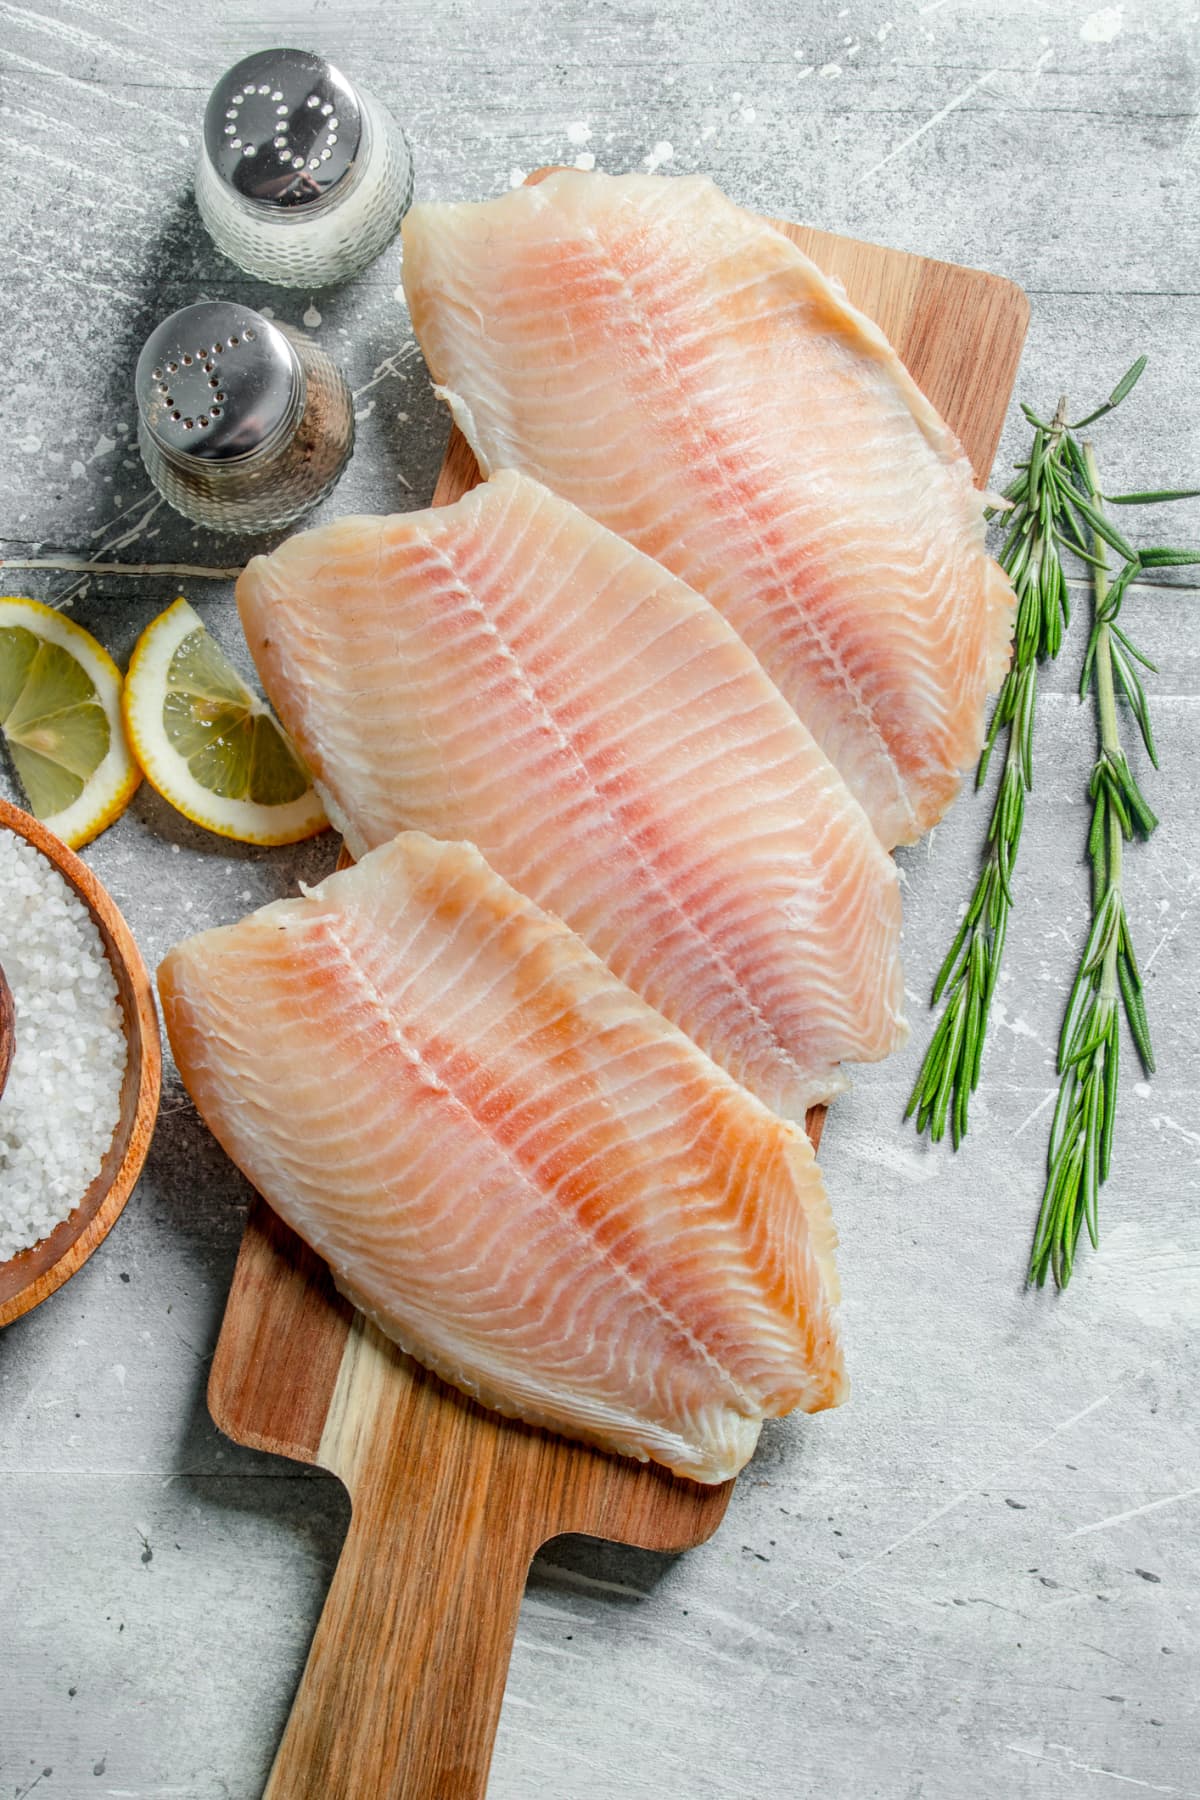 Fish fillet on a wooden cutting Board with rosemary, spices and lemon slices. On white rustic background